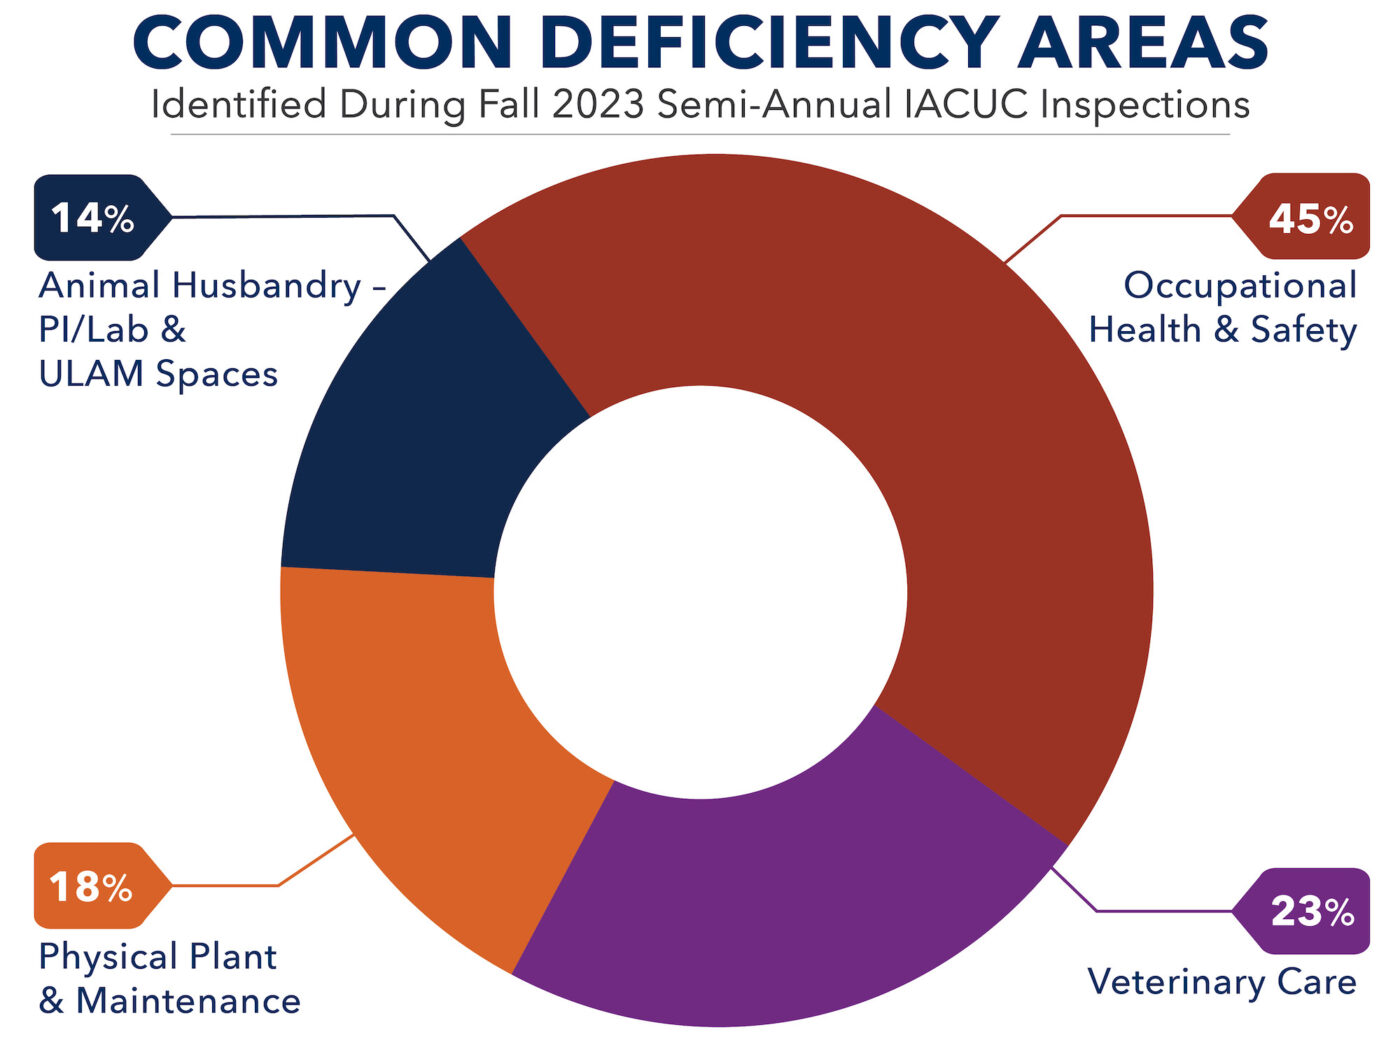 Multi-colored graph showing common deficiency areas identified during Fall 2023 semi-annual IACUC facility inspections